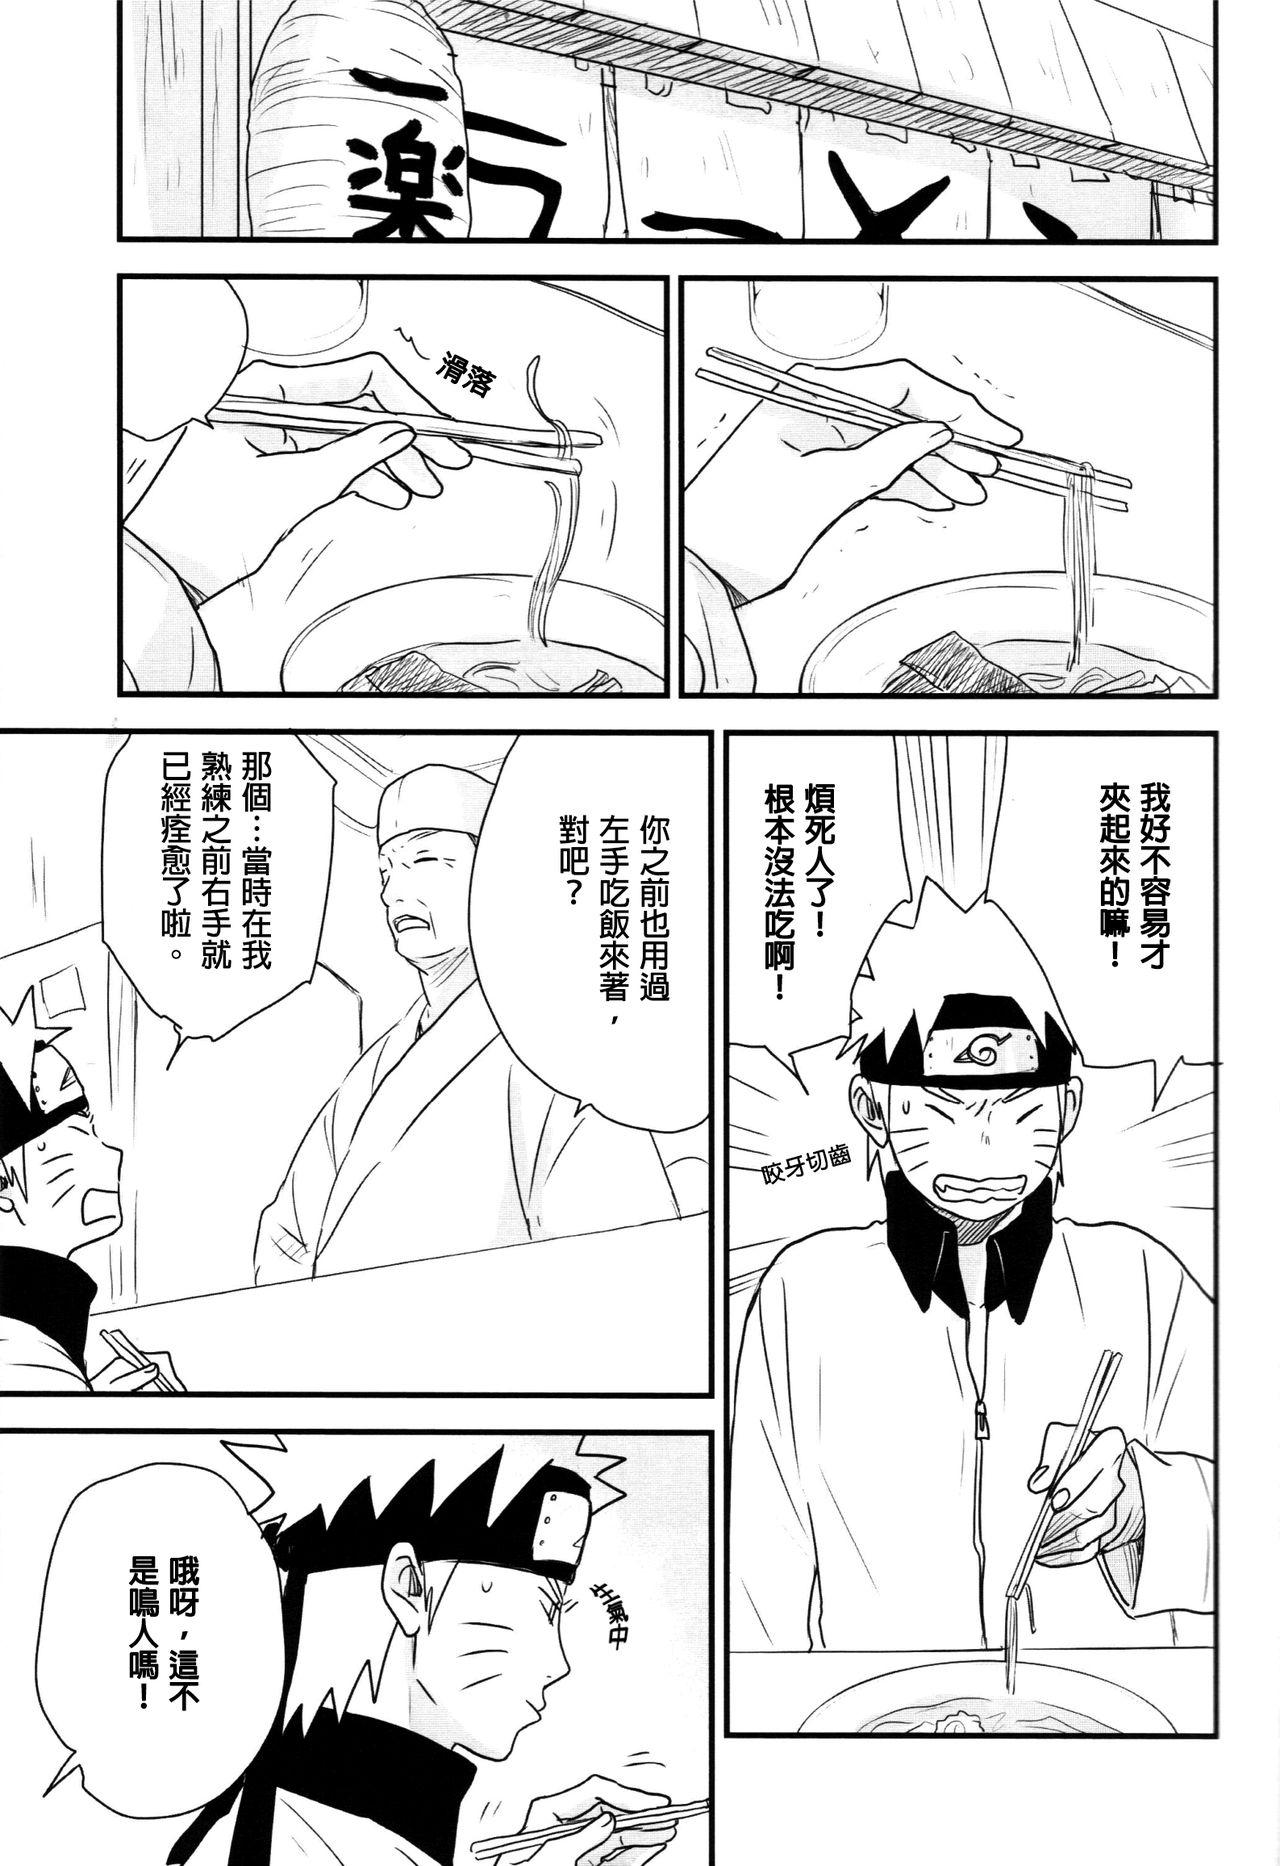 Blowjob Porn A Sweet Nightmare - Naruto Rope - Page 8